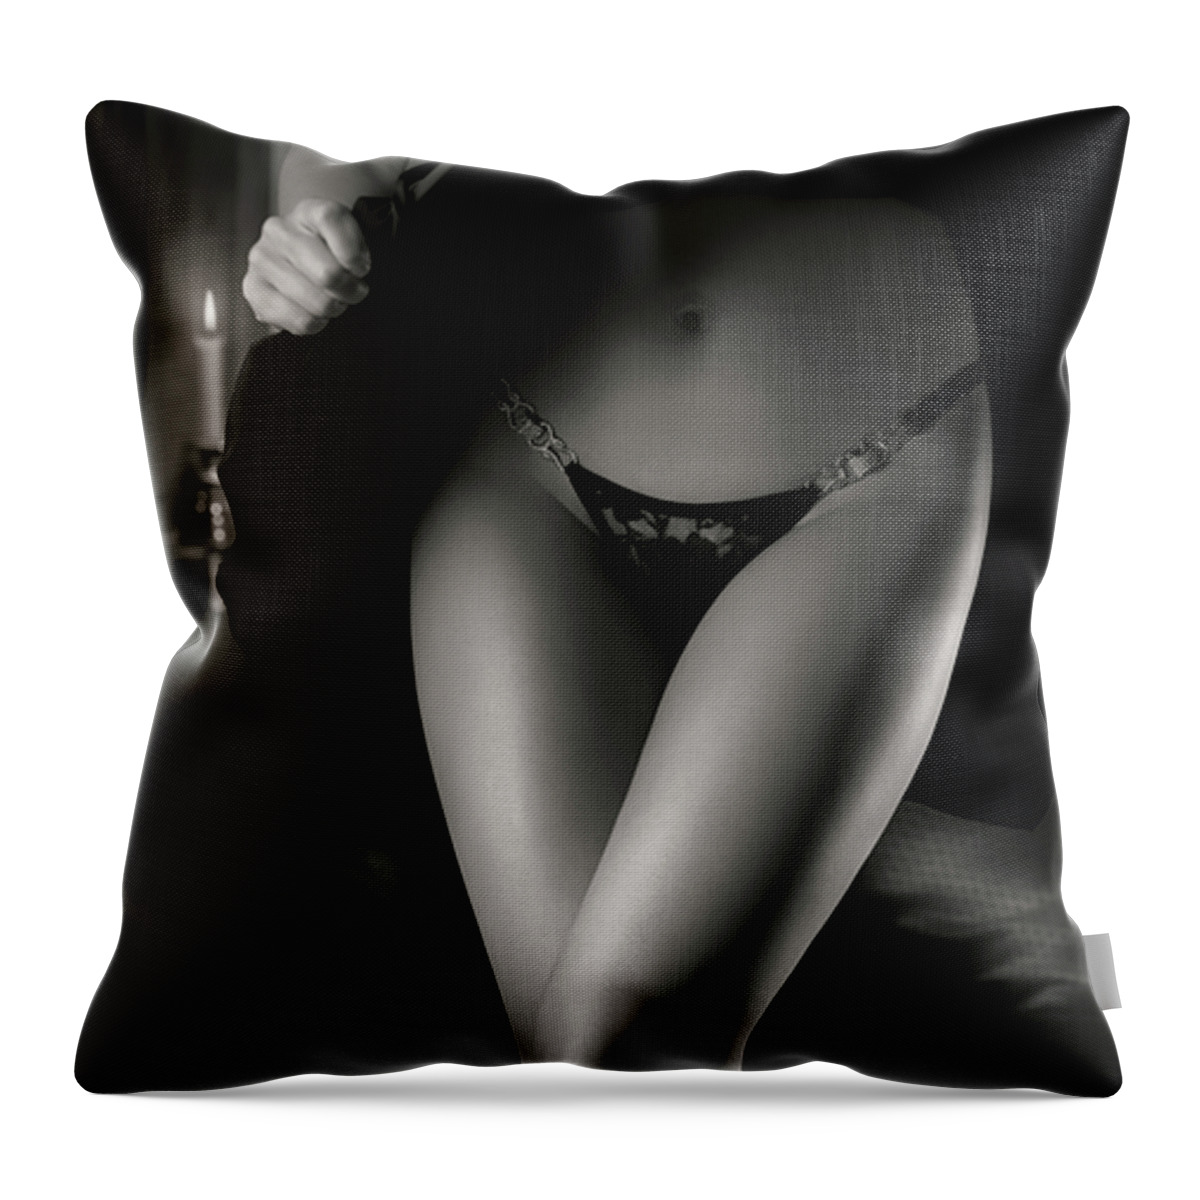 Lingerie Throw Pillow featuring the photograph Woman Wearing Black Lacy Panties #2 by Maxim Images Exquisite Prints